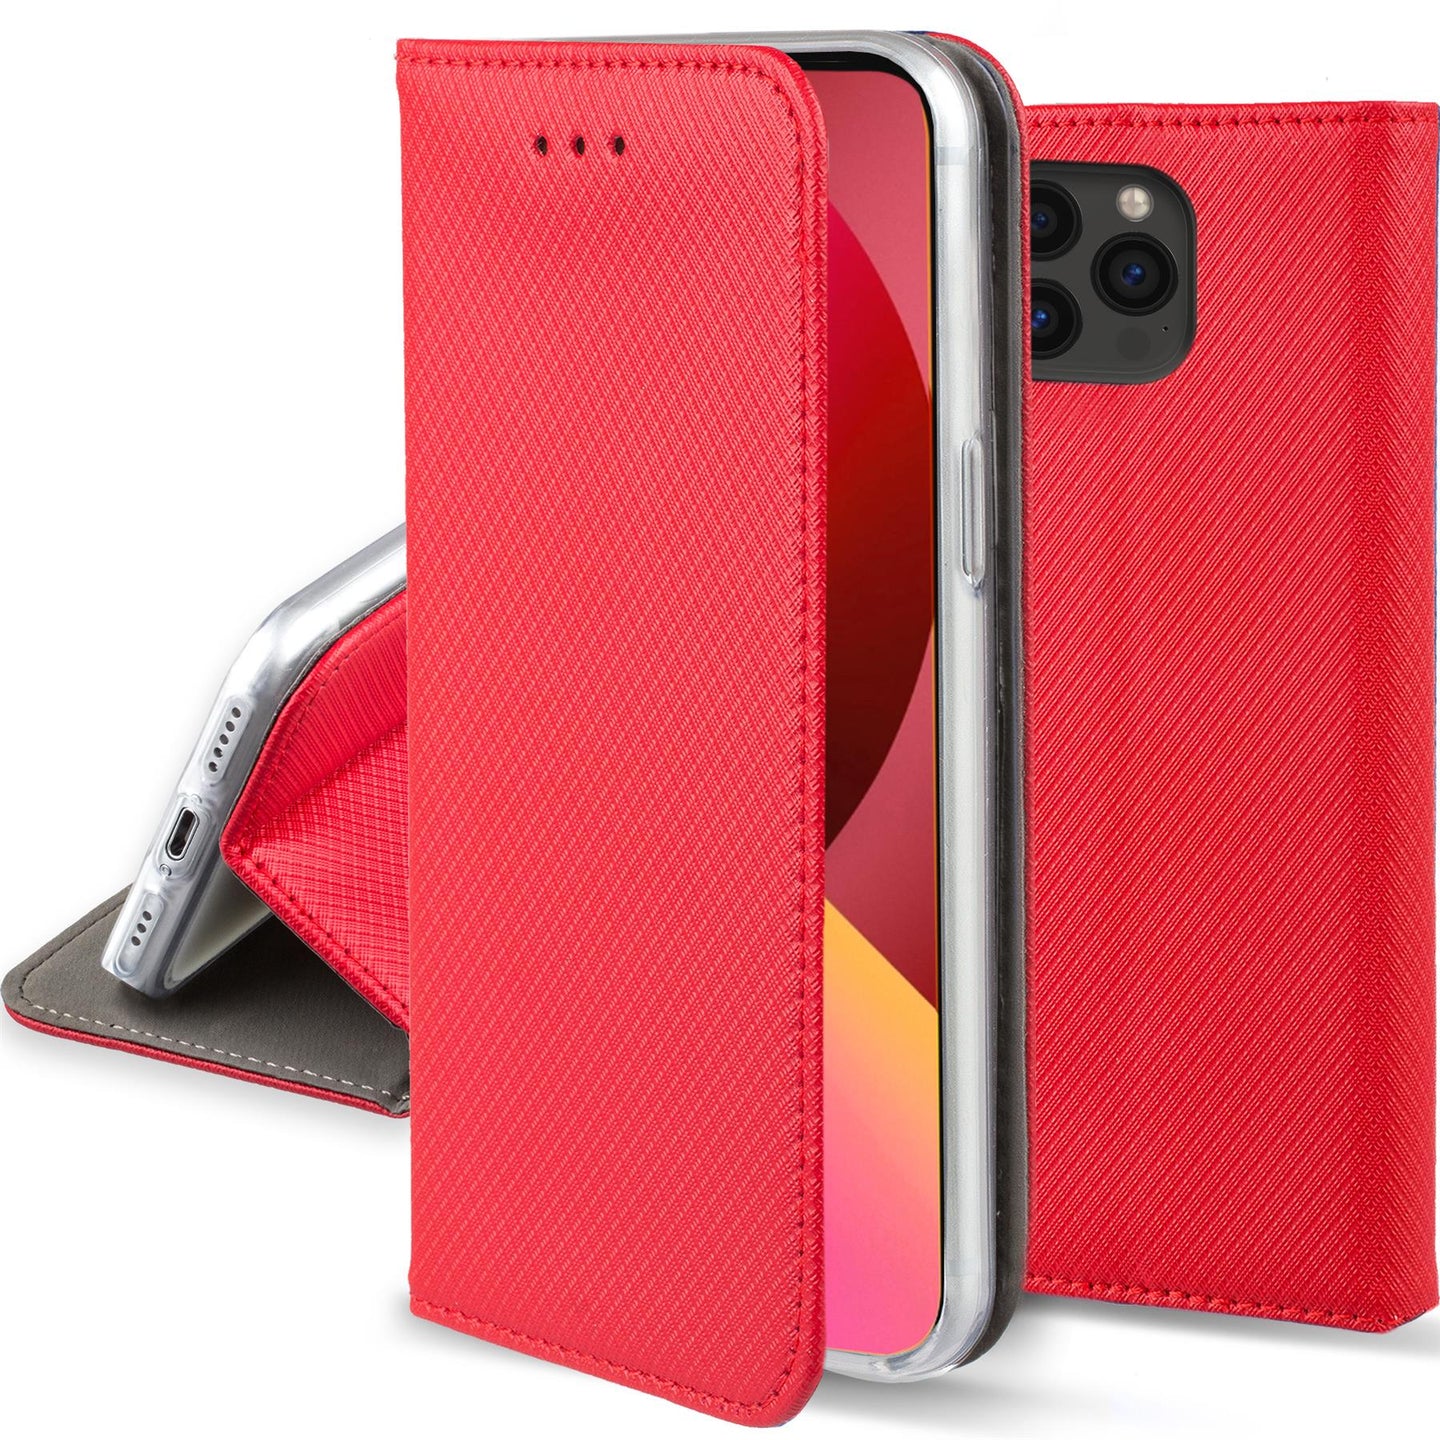 Moozy Case Flip Cover for iPhone 13 Pro, Red - Smart Magnetic Flip Case Flip Folio Wallet Case with Card Holder and Stand, Credit Card Slots10,99